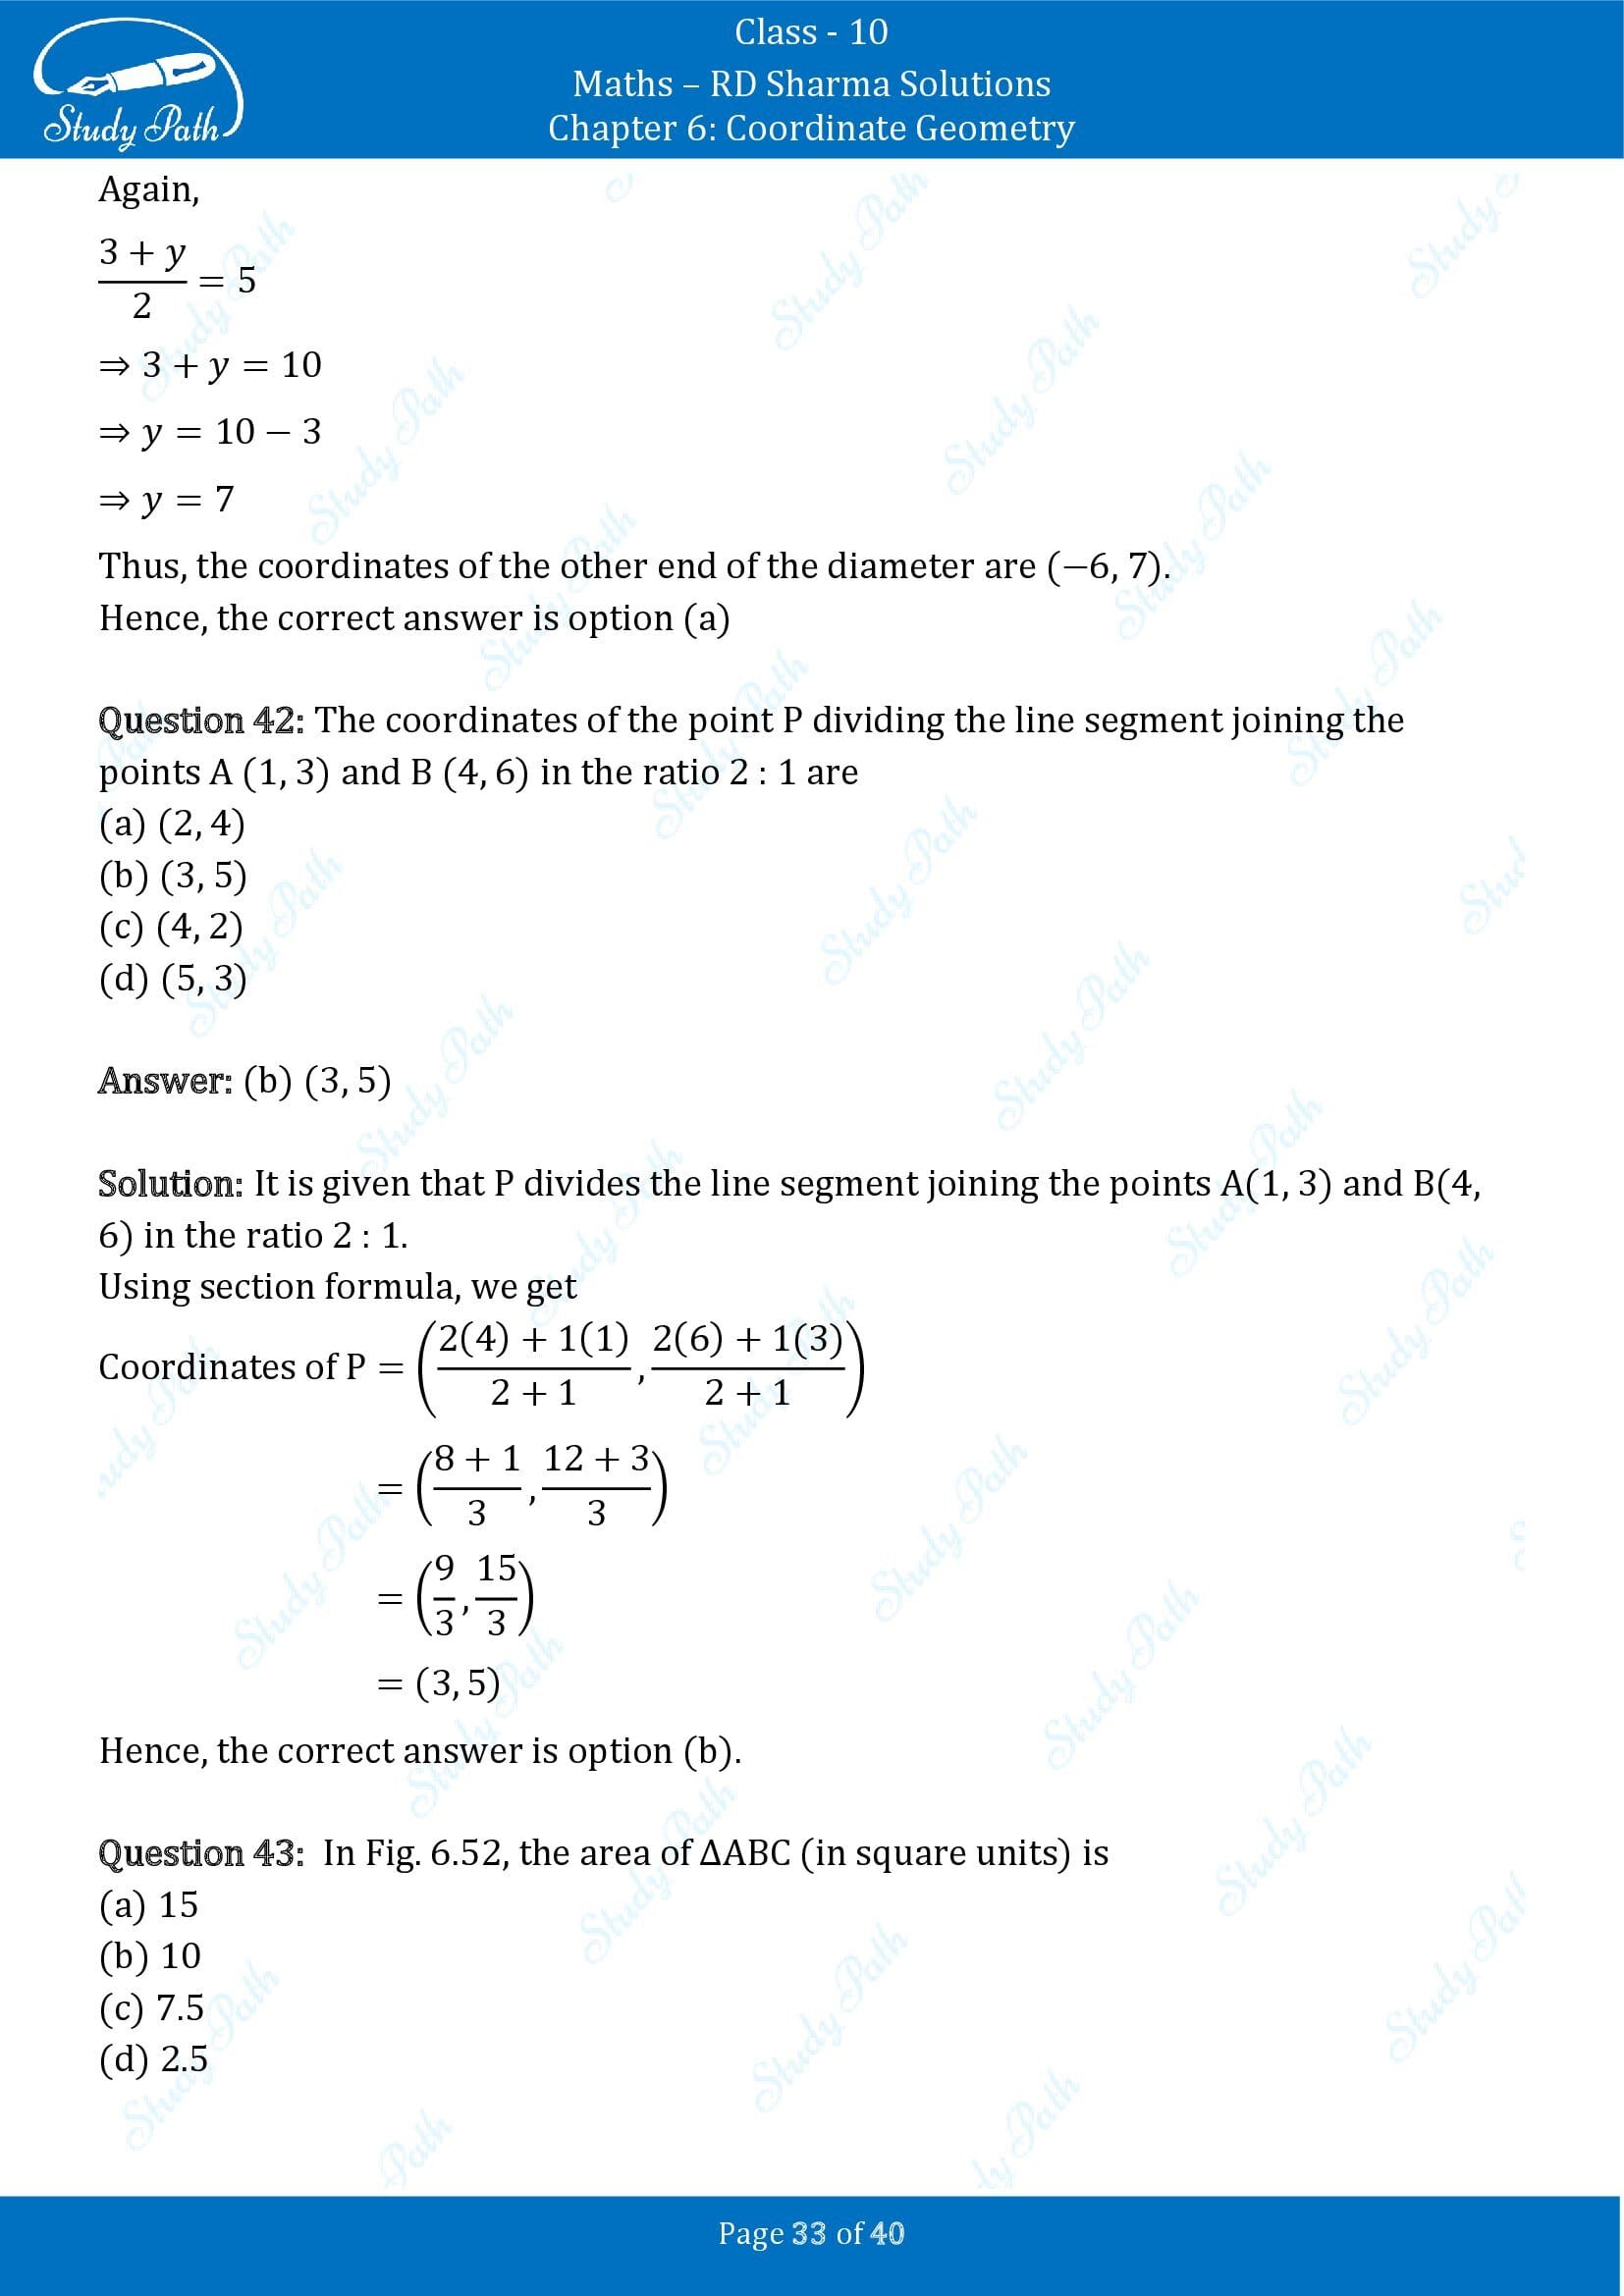 RD Sharma Solutions Class 10 Chapter 6 Coordinate Geometry Multiple Choice Question MCQs 00033